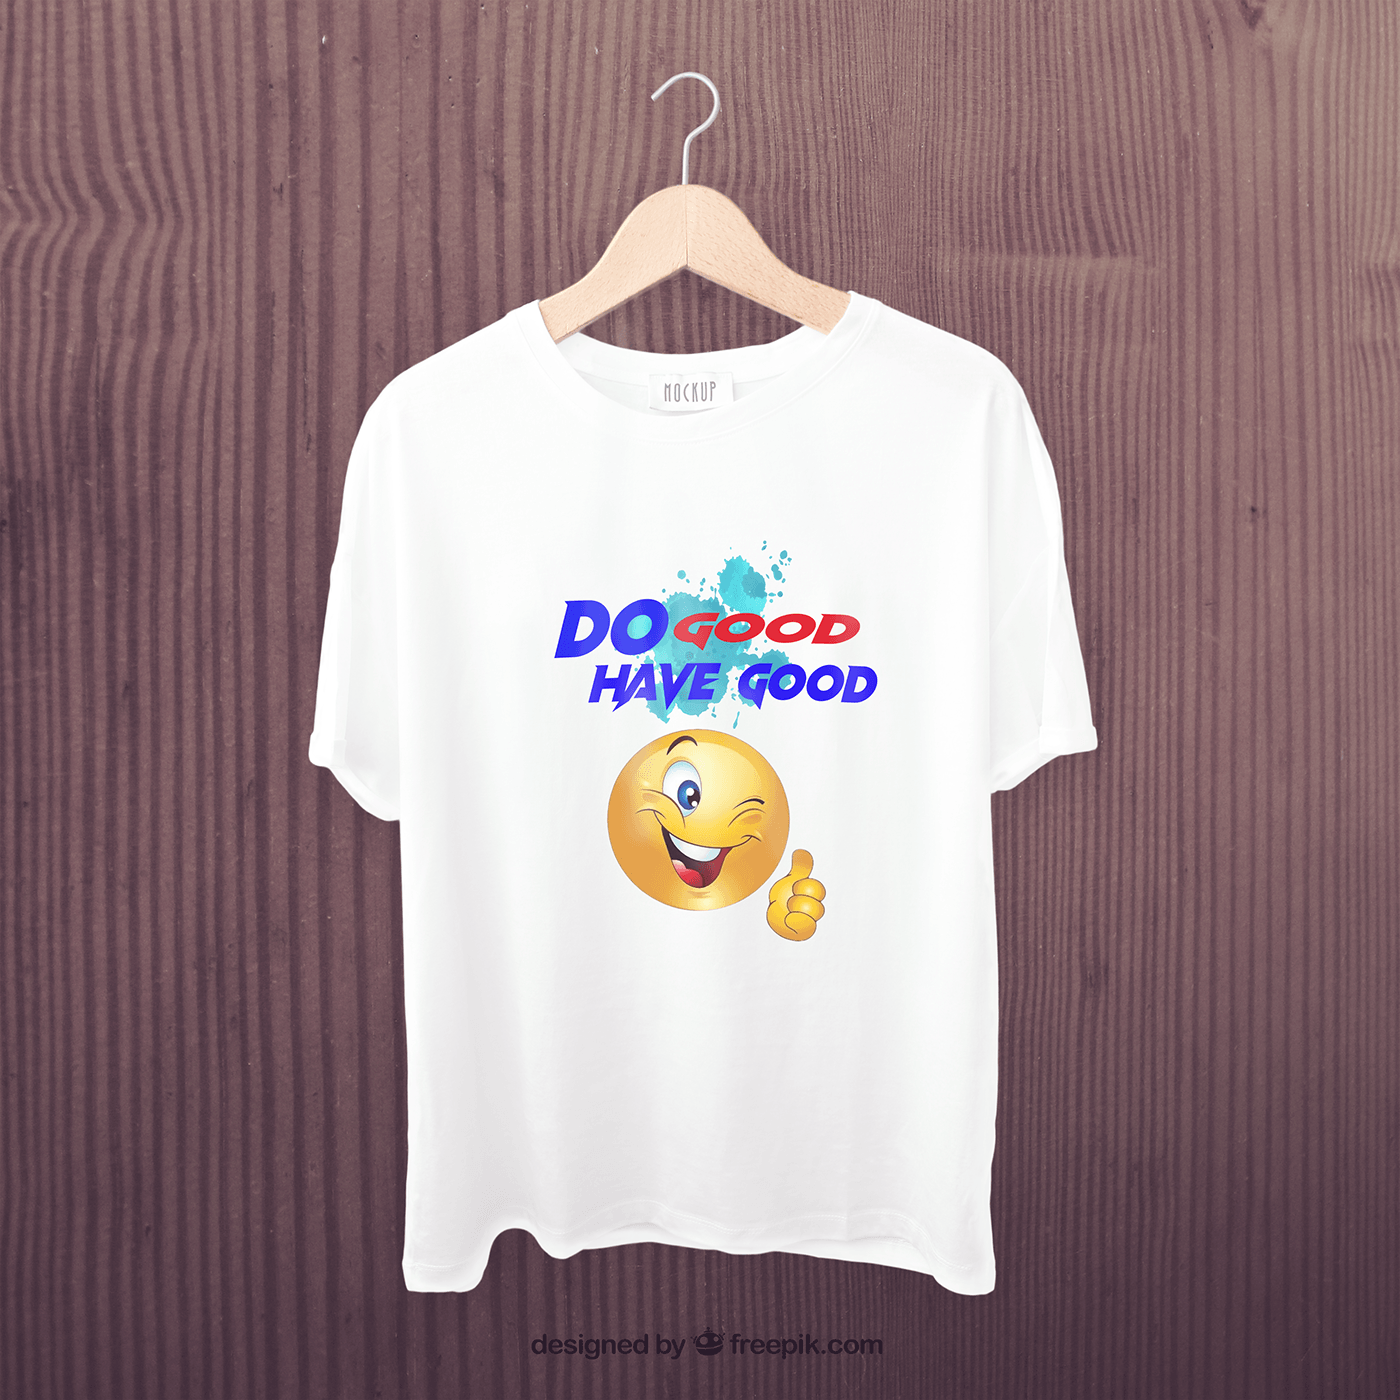 "Do Good, Have Good" slogan T-shirt with a positive vibe. 😊